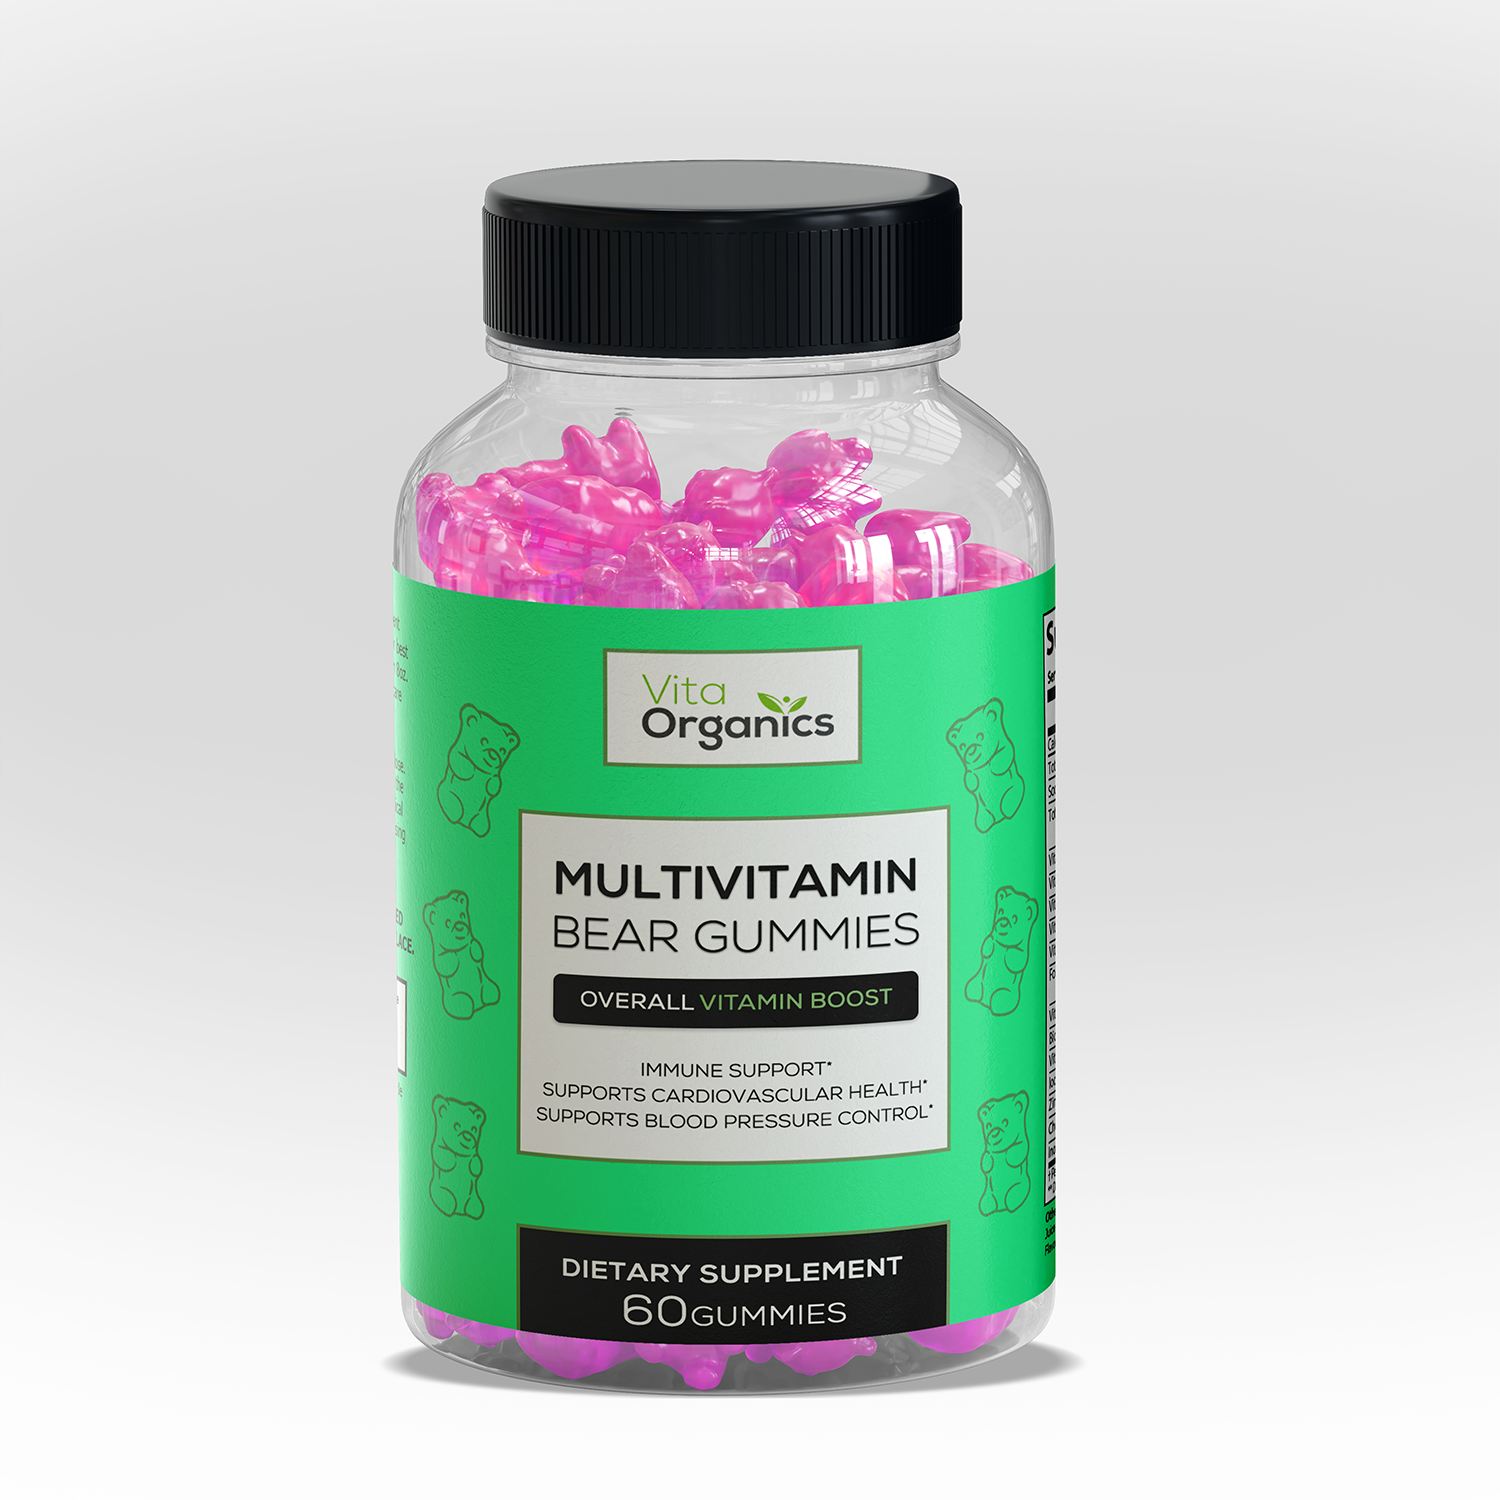 Multivitamin Bear Gummies - Your Daily Dose of Wellness